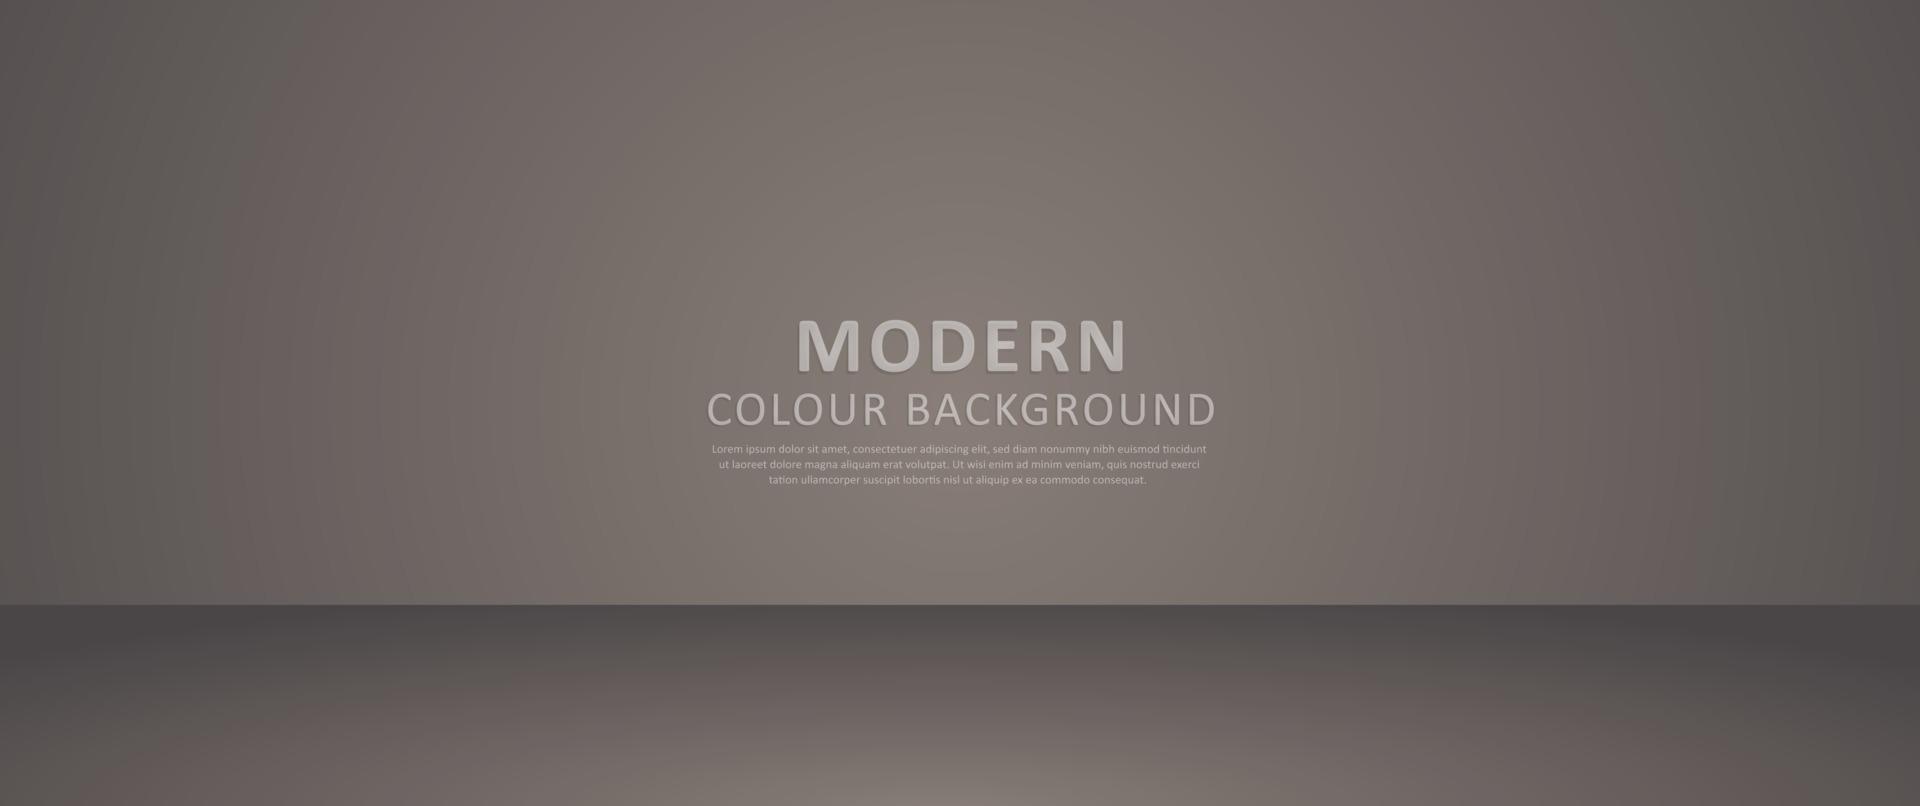 Abstract creative concept vector modern color gradient background